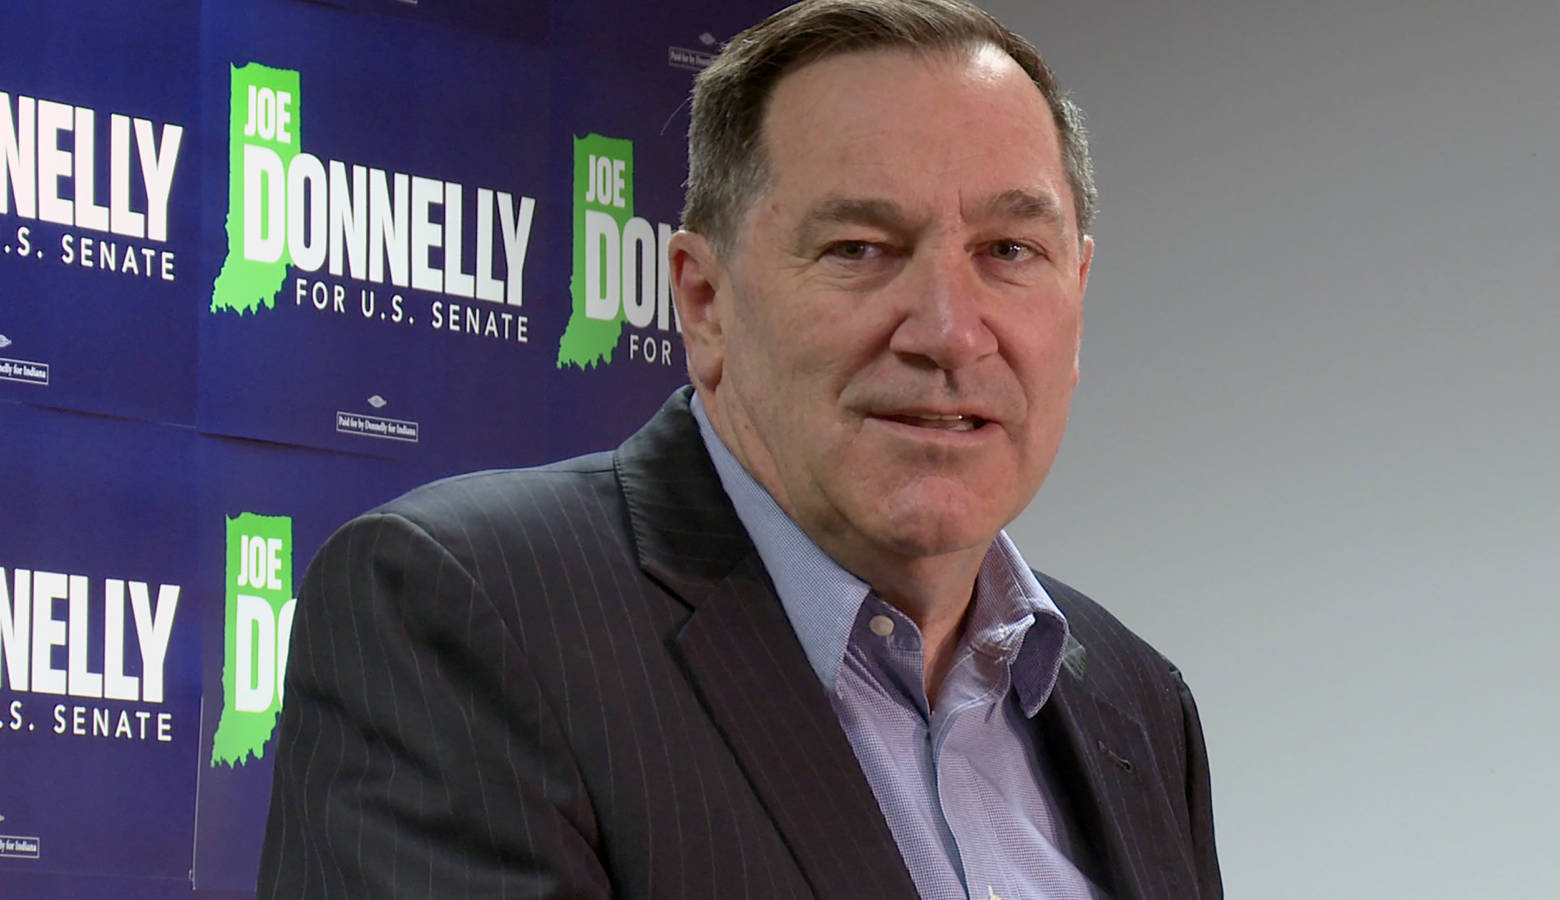 Sen. Joe Donnelly (D-Ind.) says he's ready for a fight against Republican Senate candidate Mike Braun. (Lauren Chapman/IPB News)